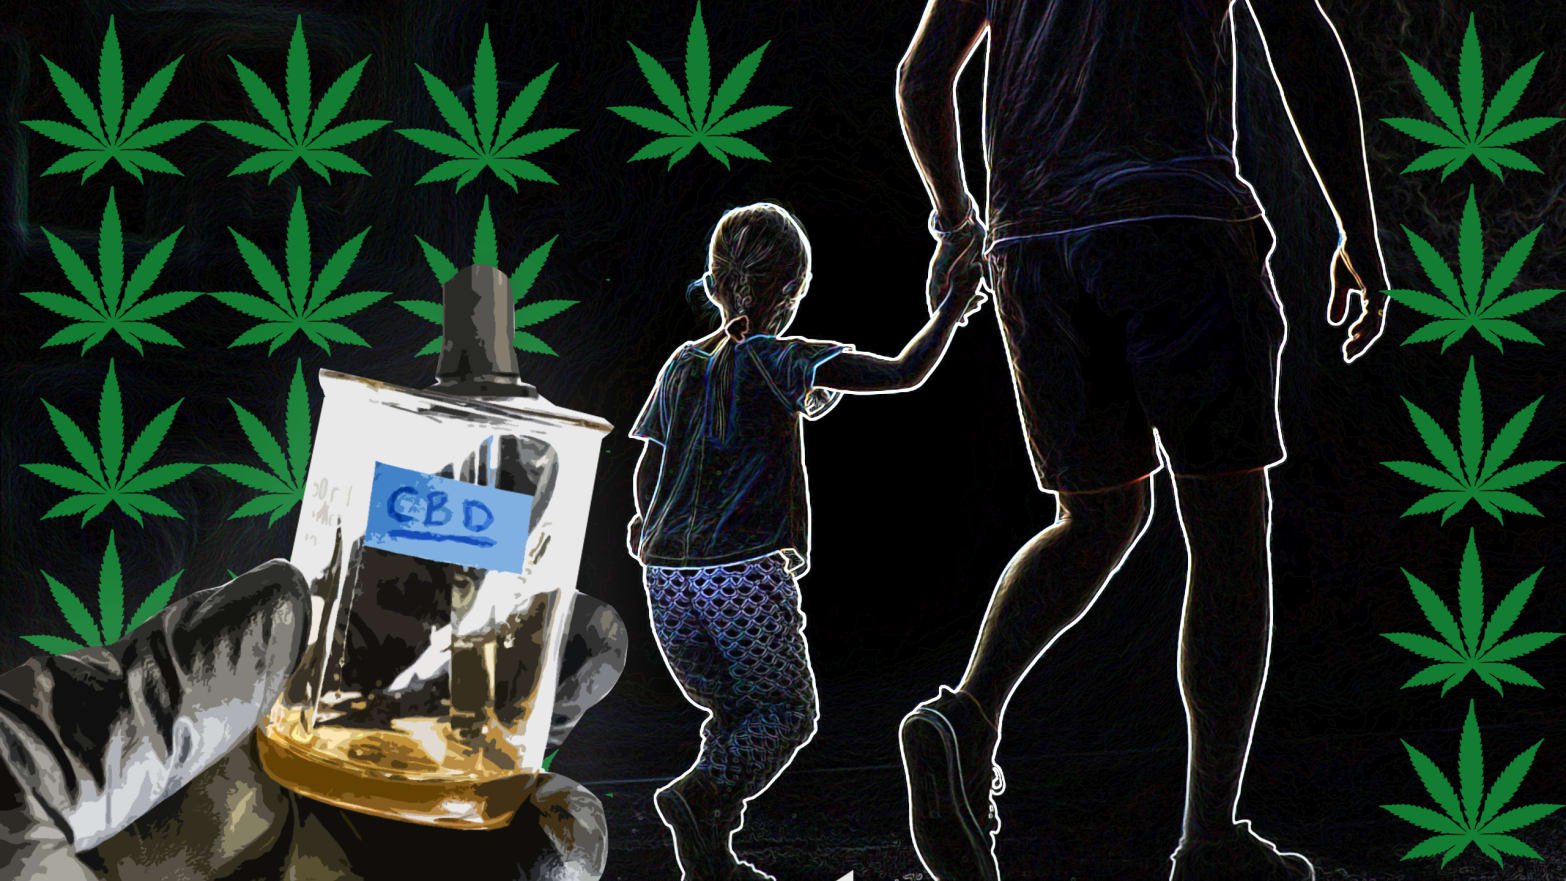 silhouette image of an adult leading a child by the hand background marijuana leaves forefront closeup of gloved hand holding cbd oil